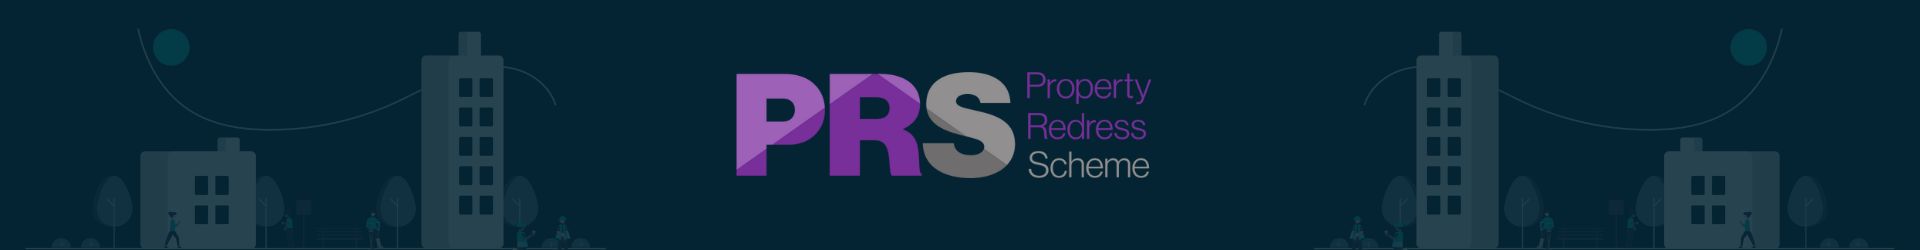 NAPSA is Partnered With The Property Redress Scheme (PRS)